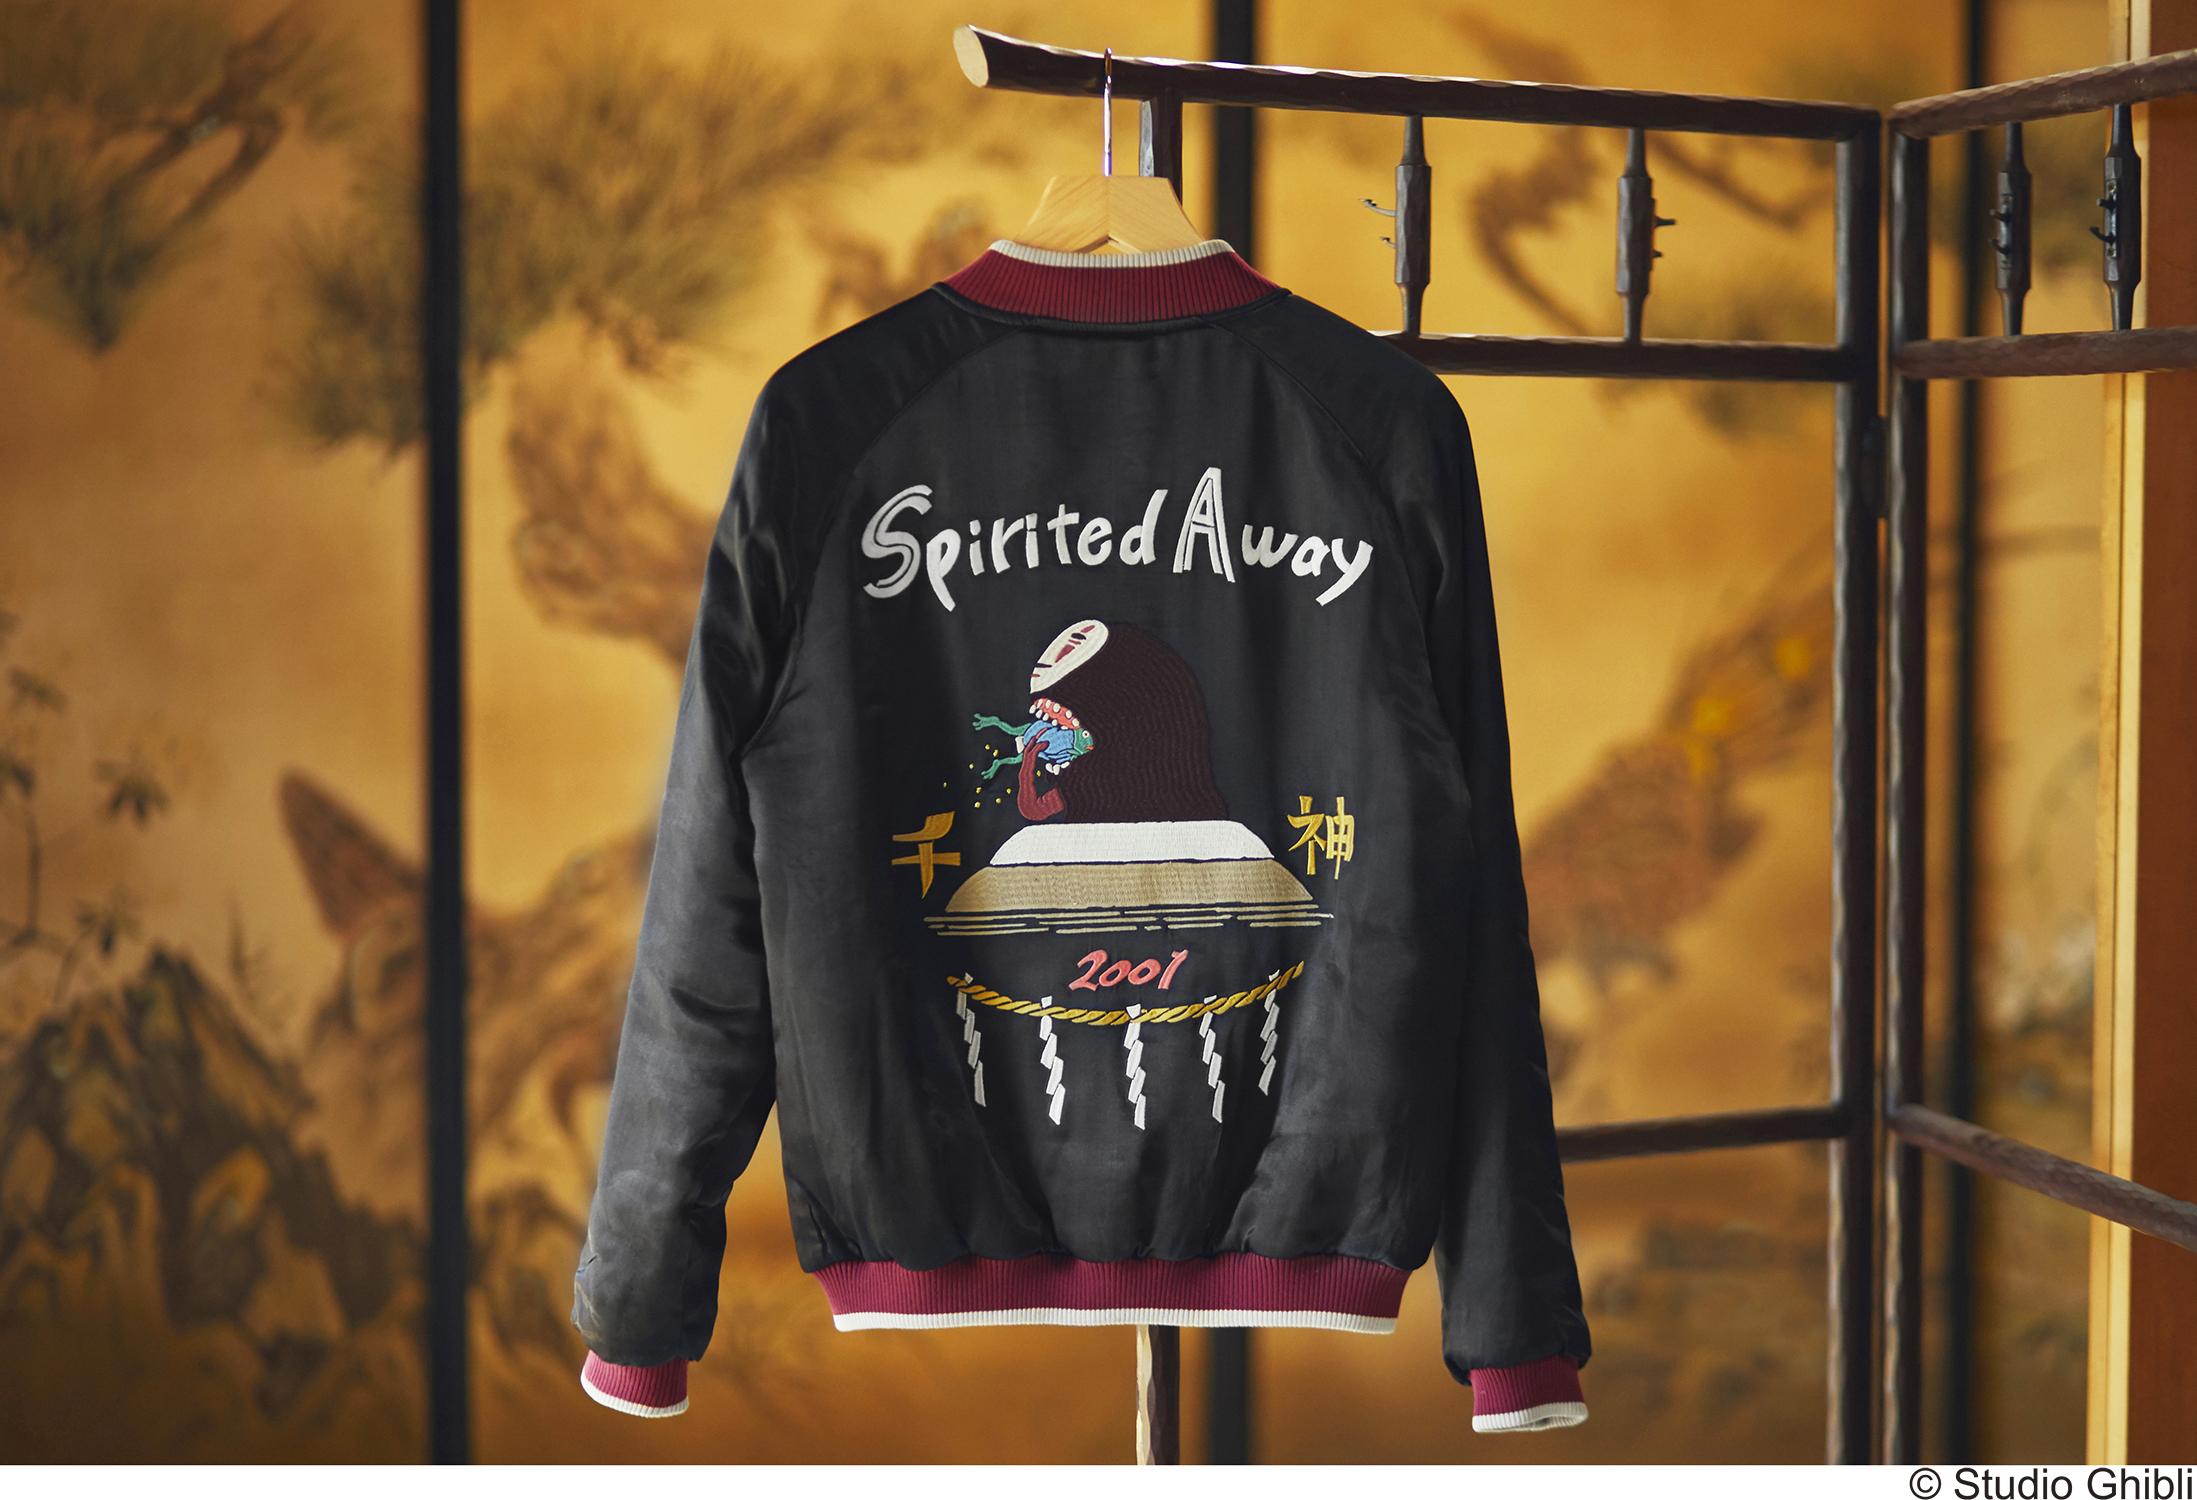 Celebrate Spirited Away's 20th birthday with themed, whimsically